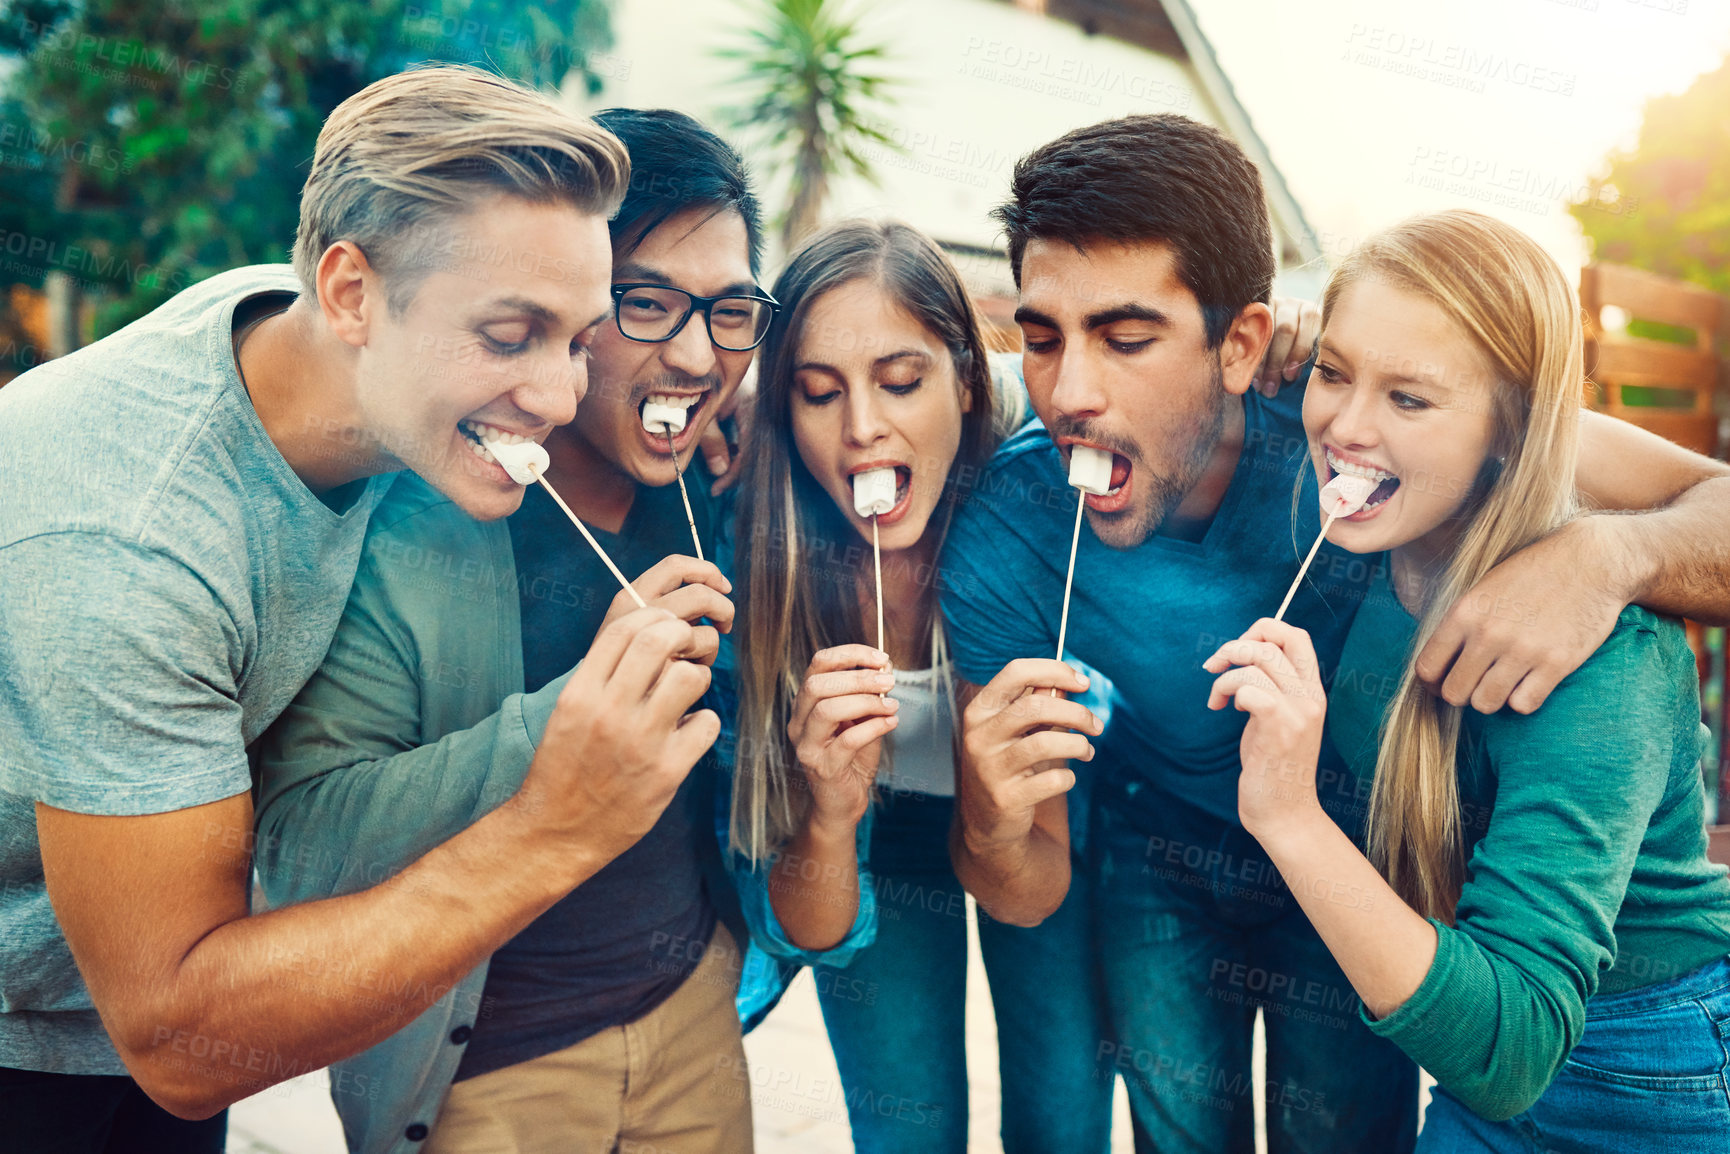 Buy stock photo Shot of a group of young friends posing together while eating marshmallows on sticks outside